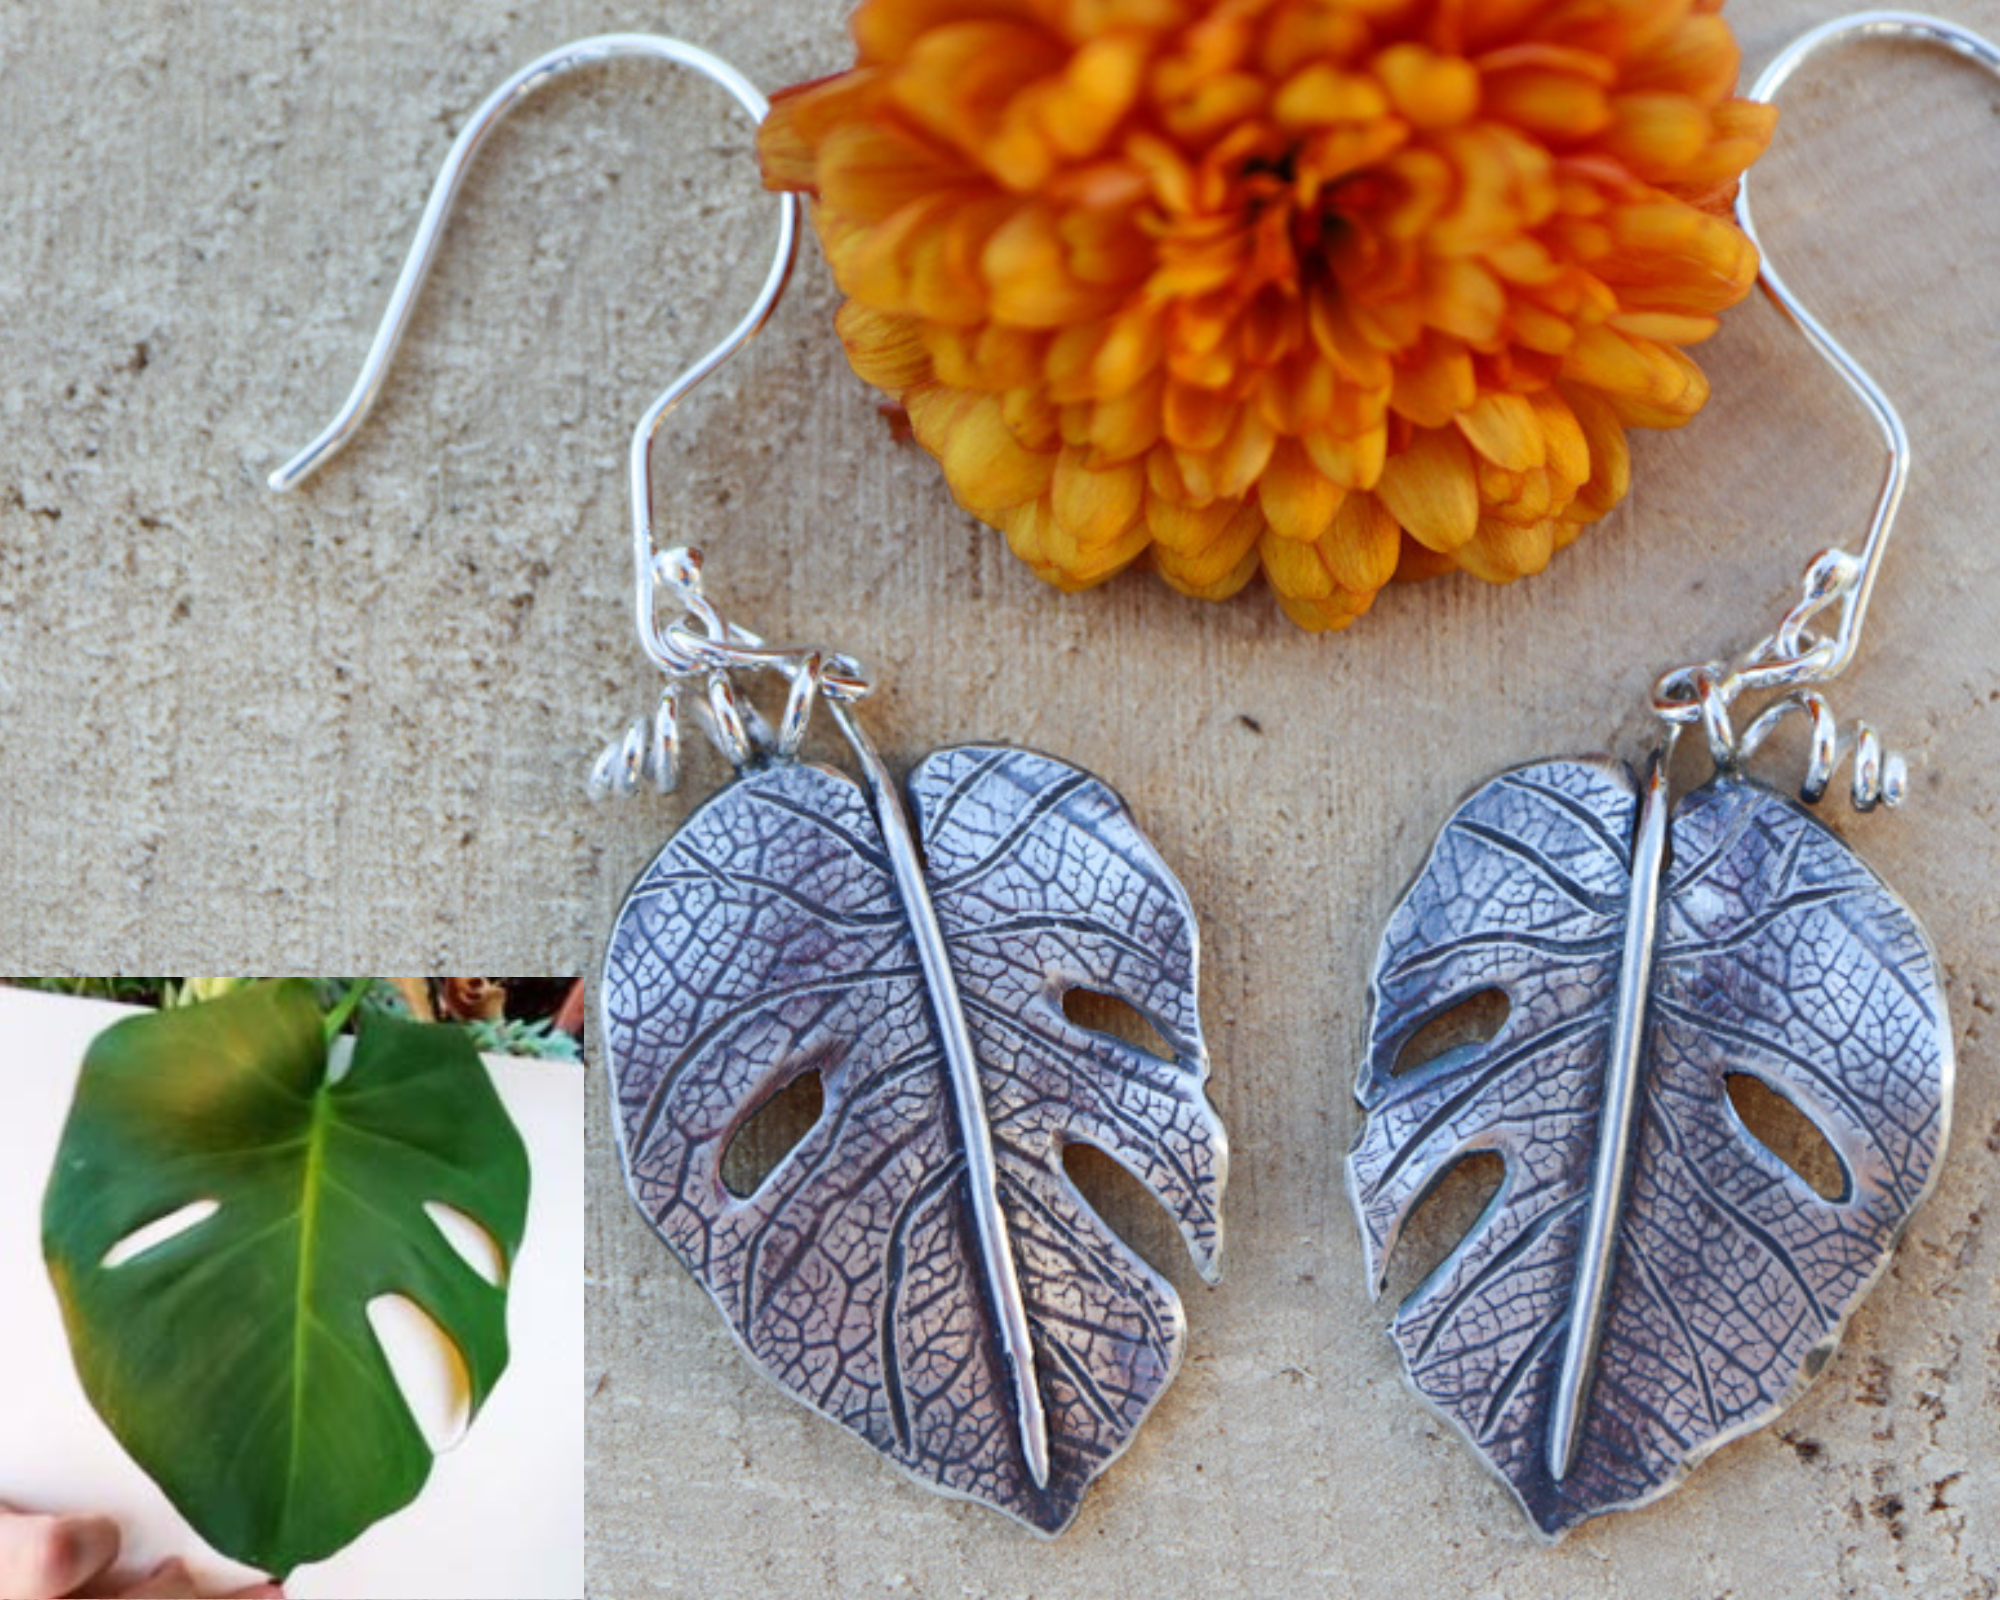 Personalized monstera deliciosa earrings made from sterling silver. They are shown next to a photo of the real plant leaf that the earrings were modeled after. 